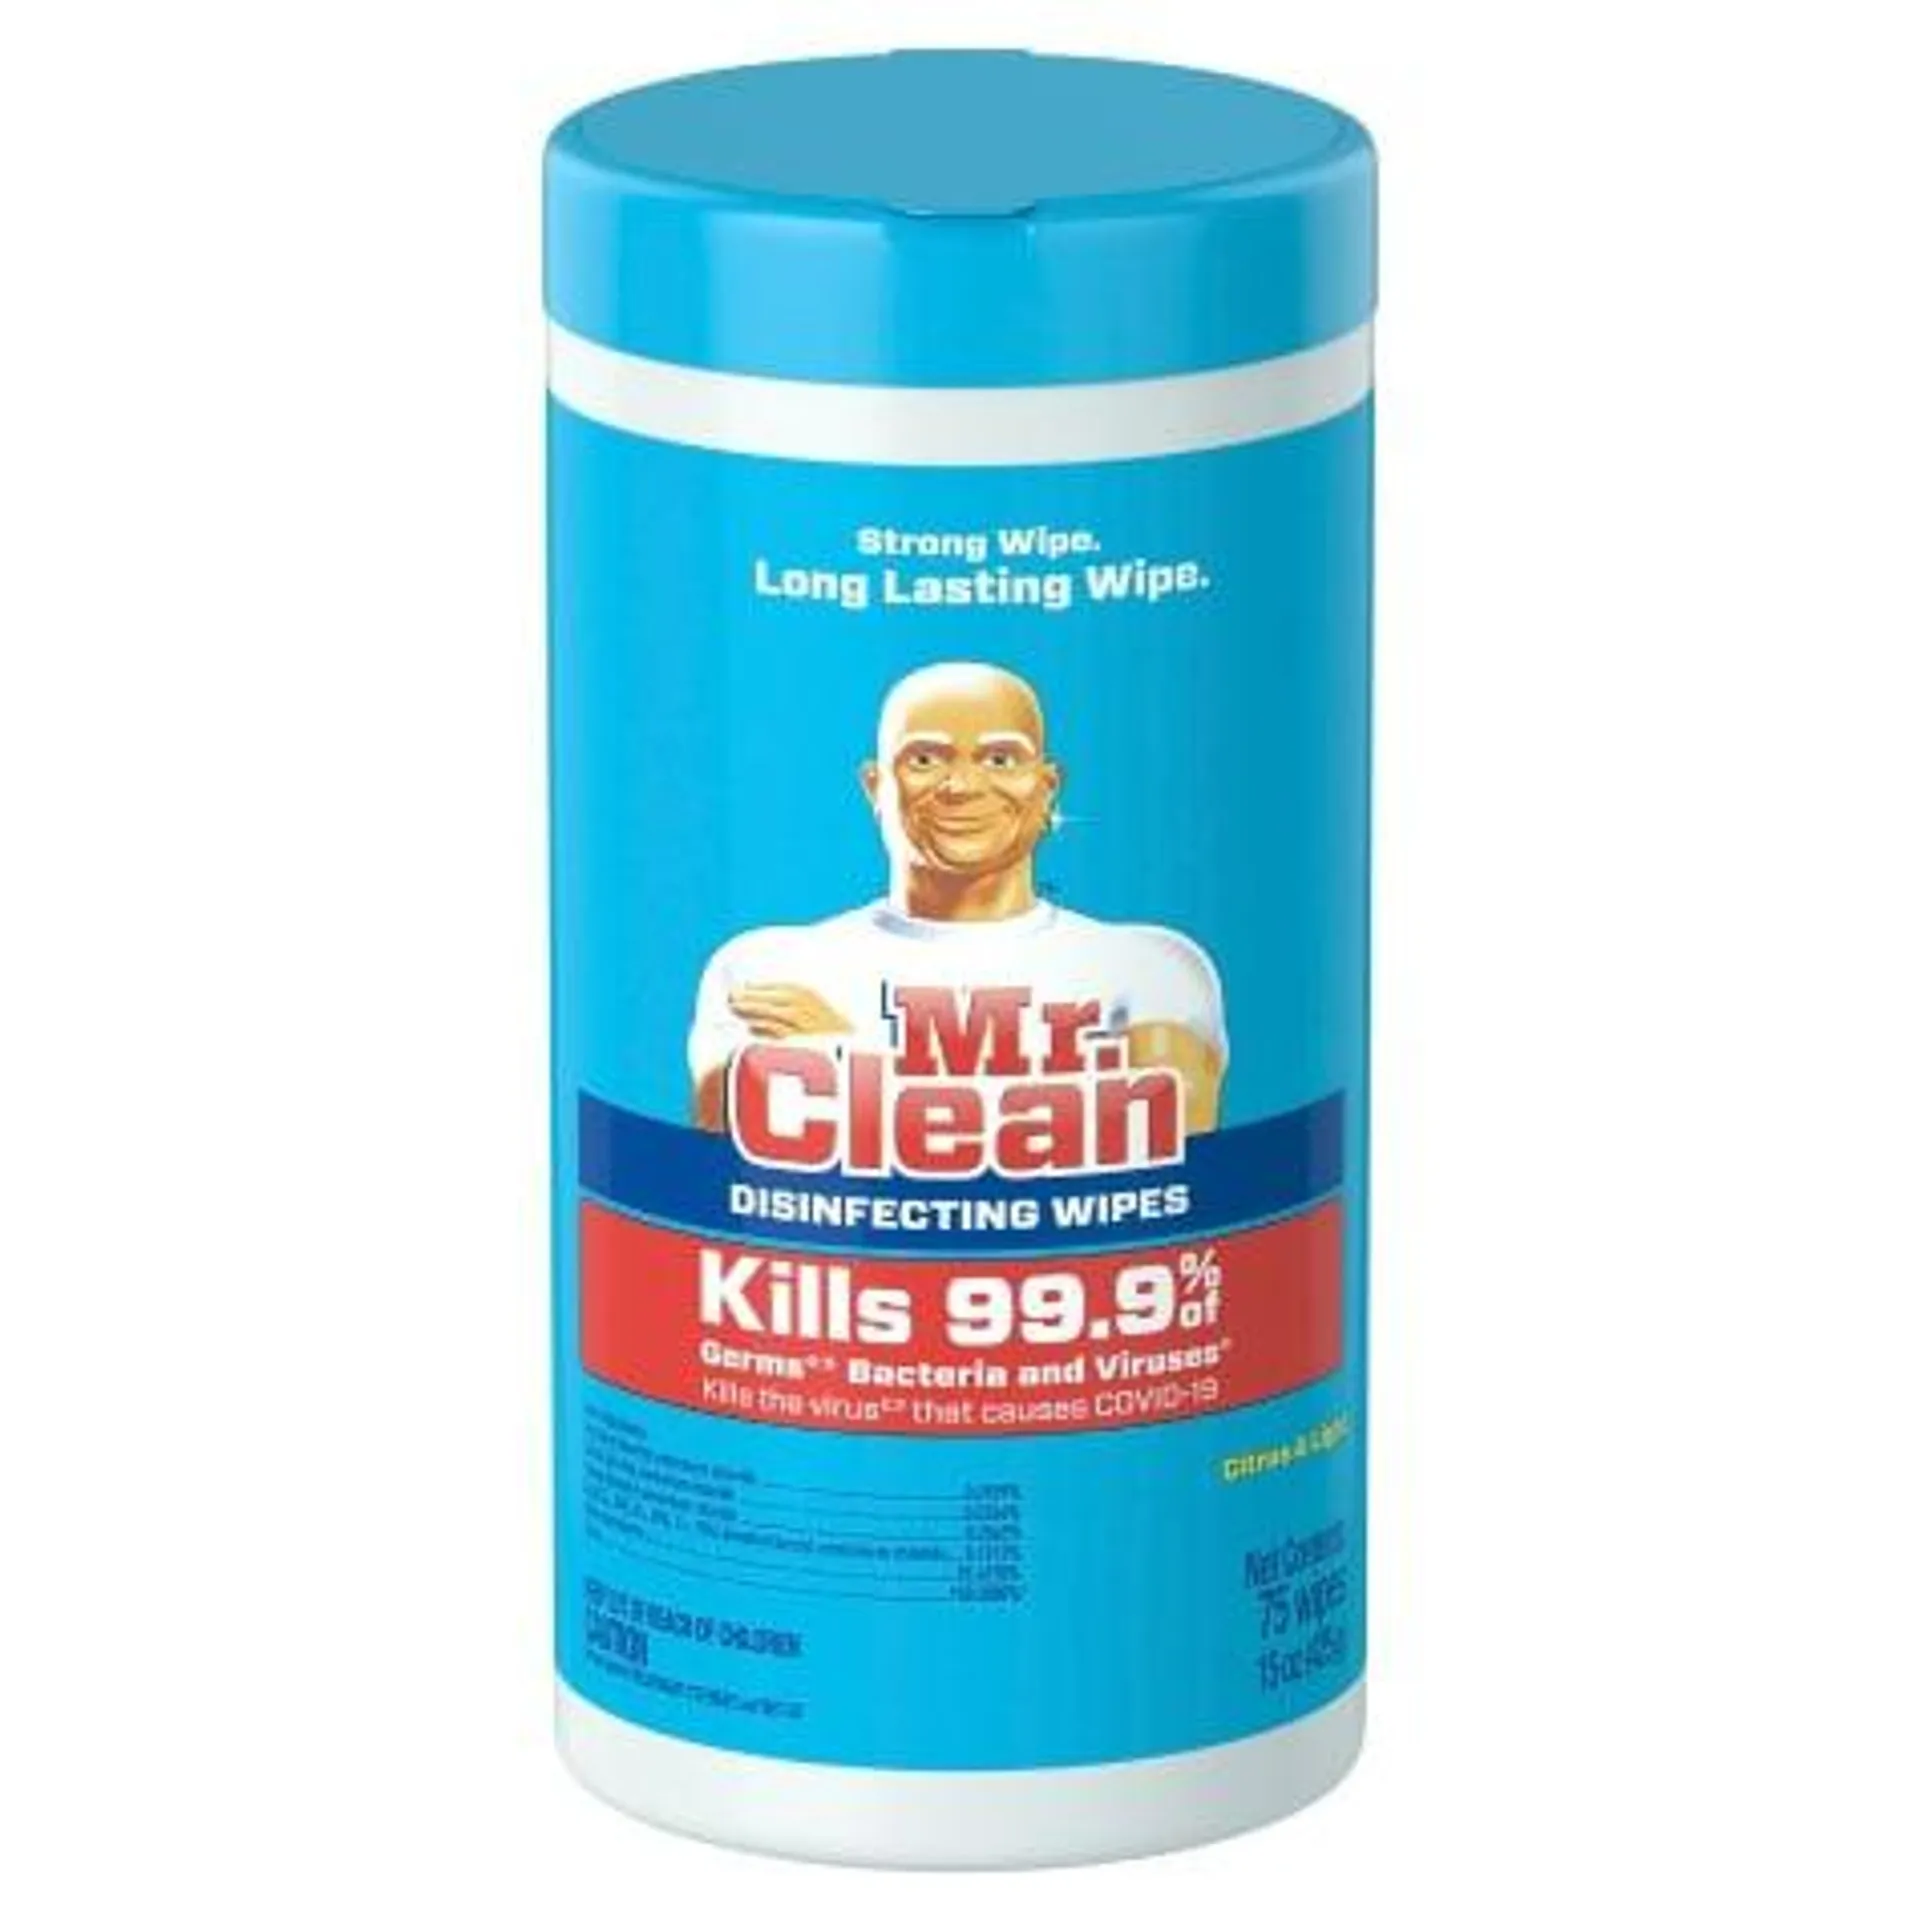 Mr. Clean Disinfecting Wipes, Citrus Scent, 75 count